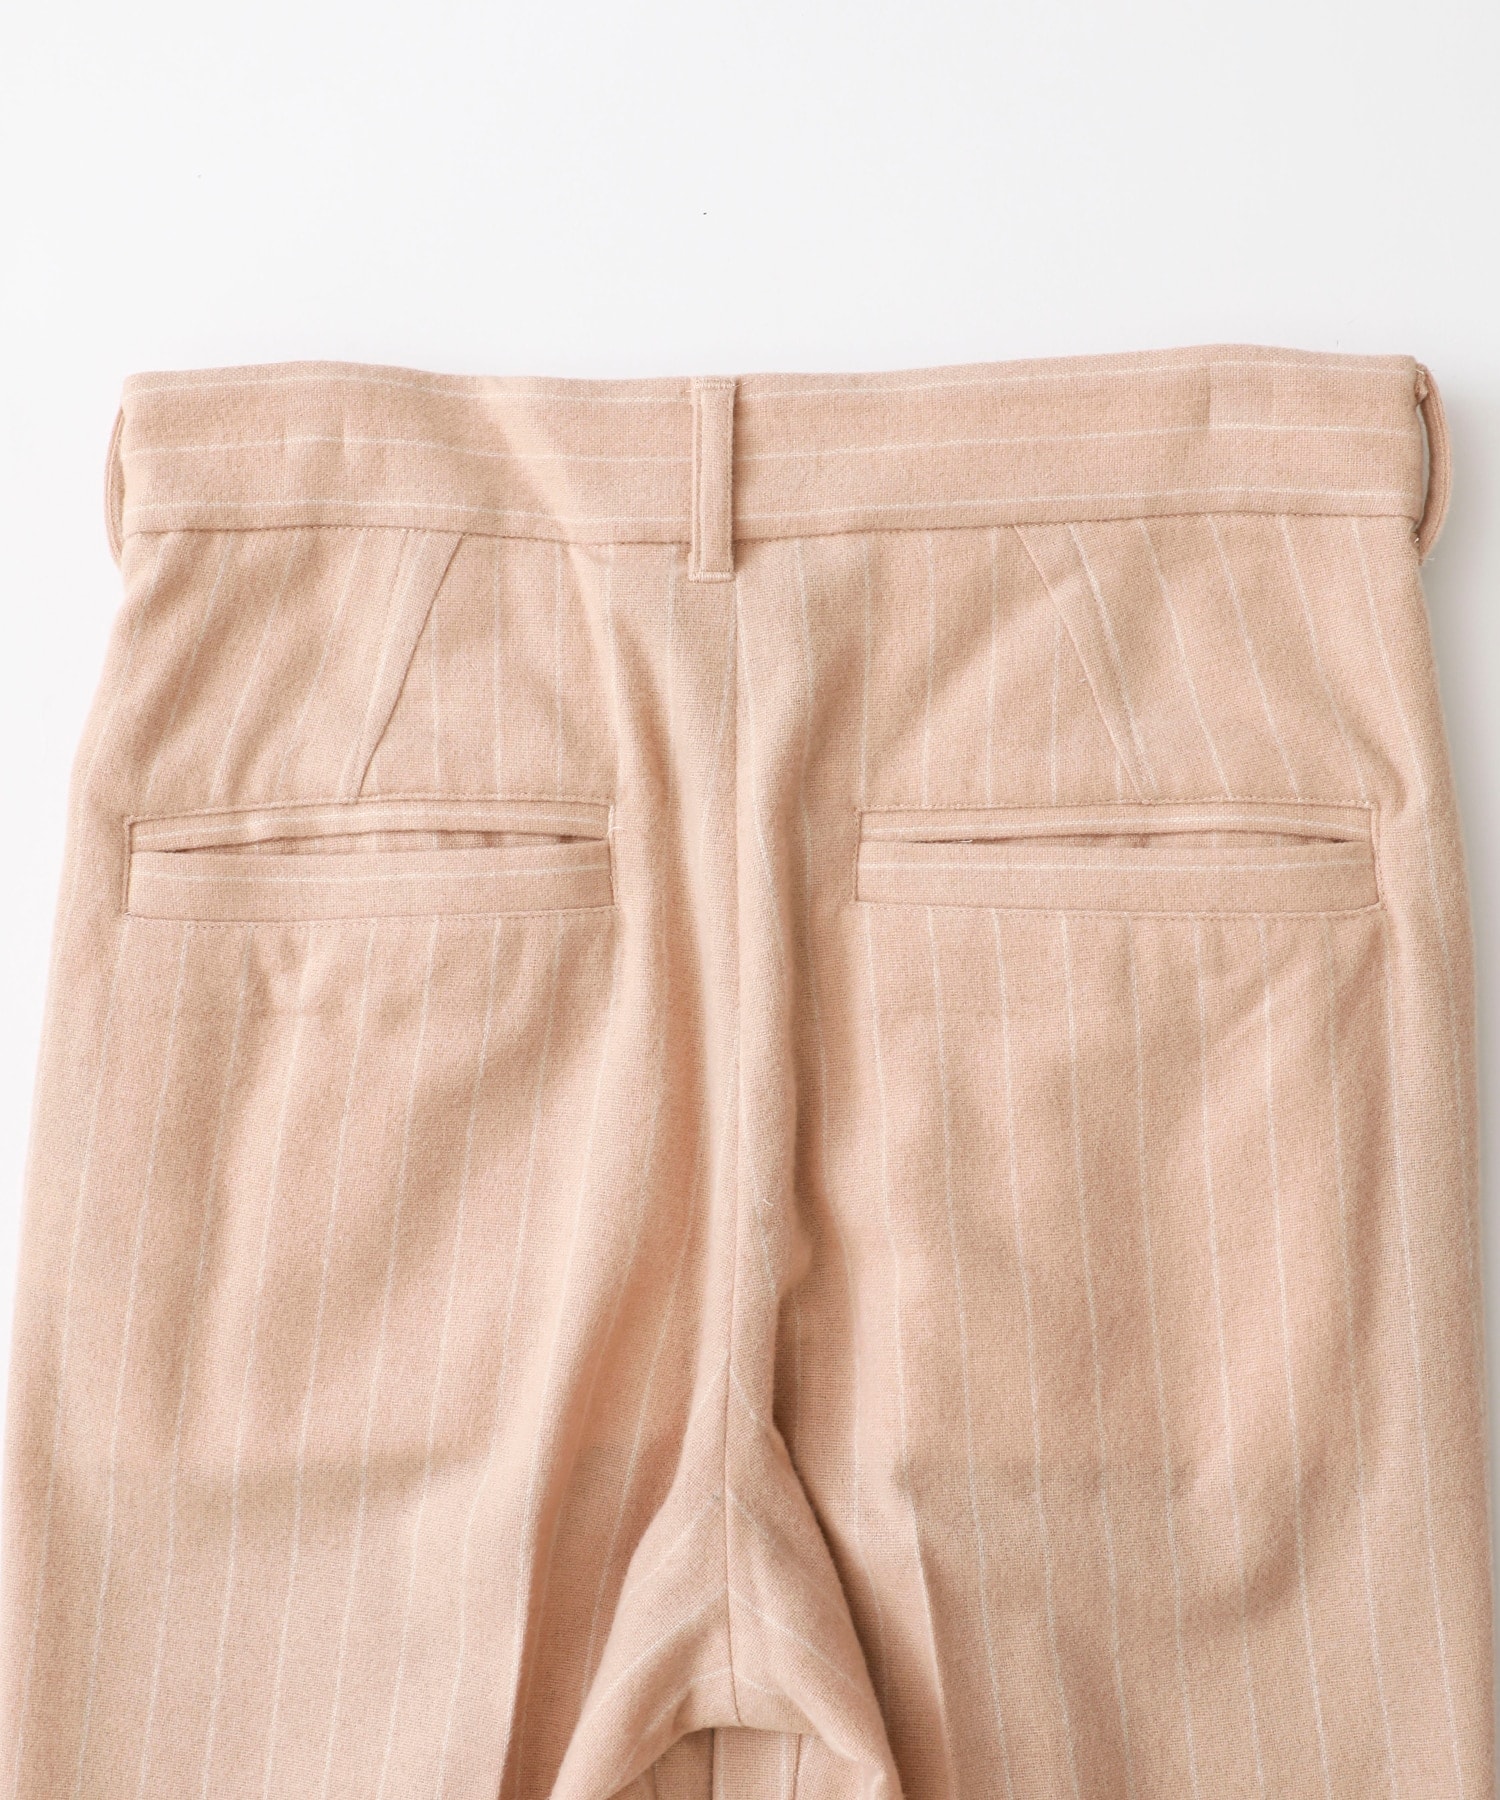 Bed j.w ford Over Waist Pants peach